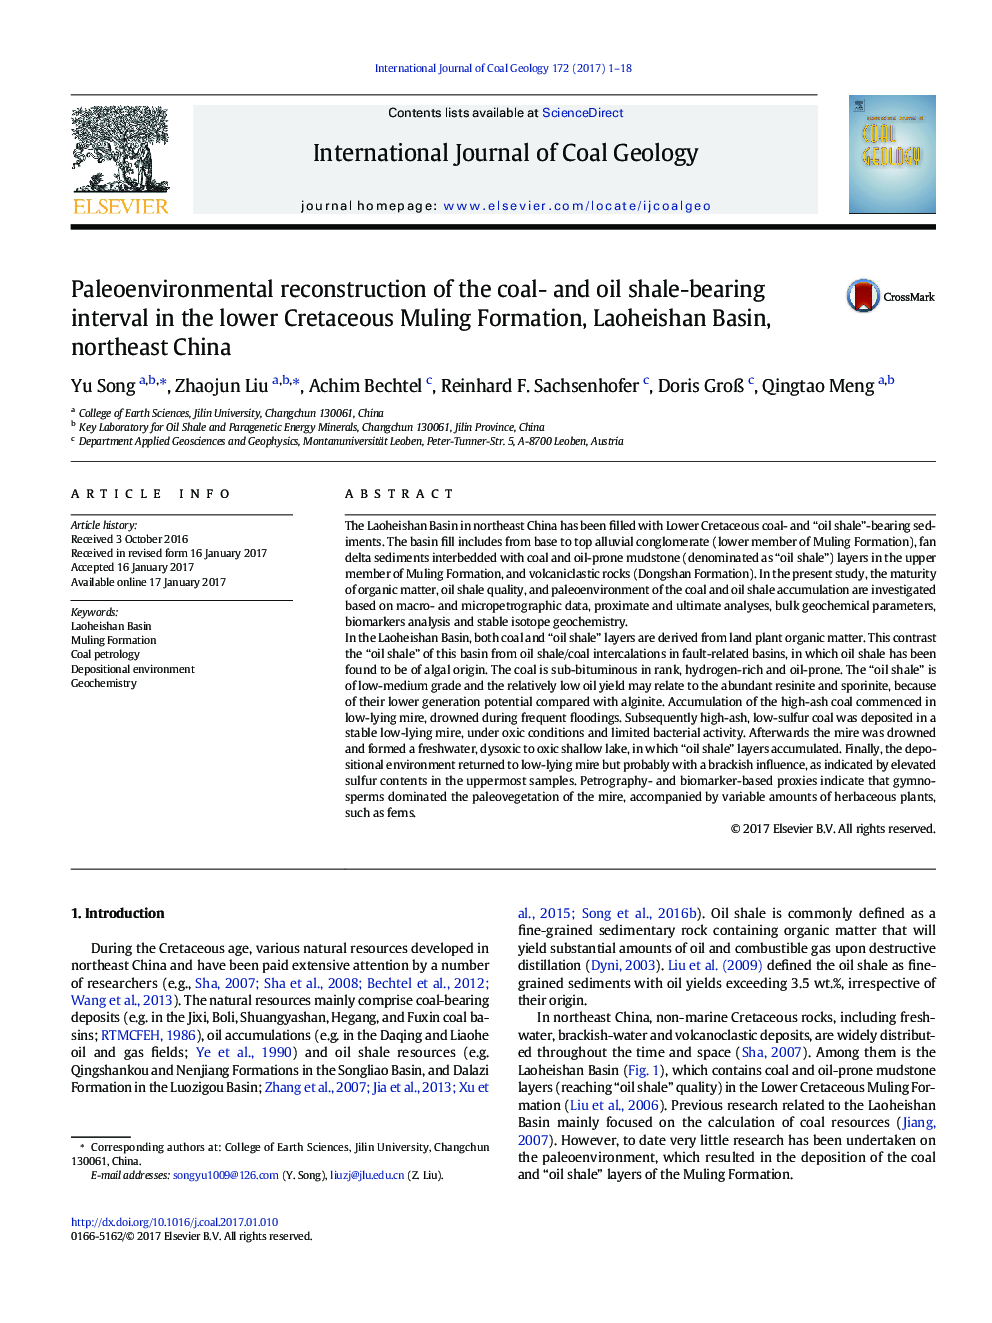 Paleoenvironmental reconstruction of the coal- and oil shale-bearing interval in the lower Cretaceous Muling Formation, Laoheishan Basin, northeast China